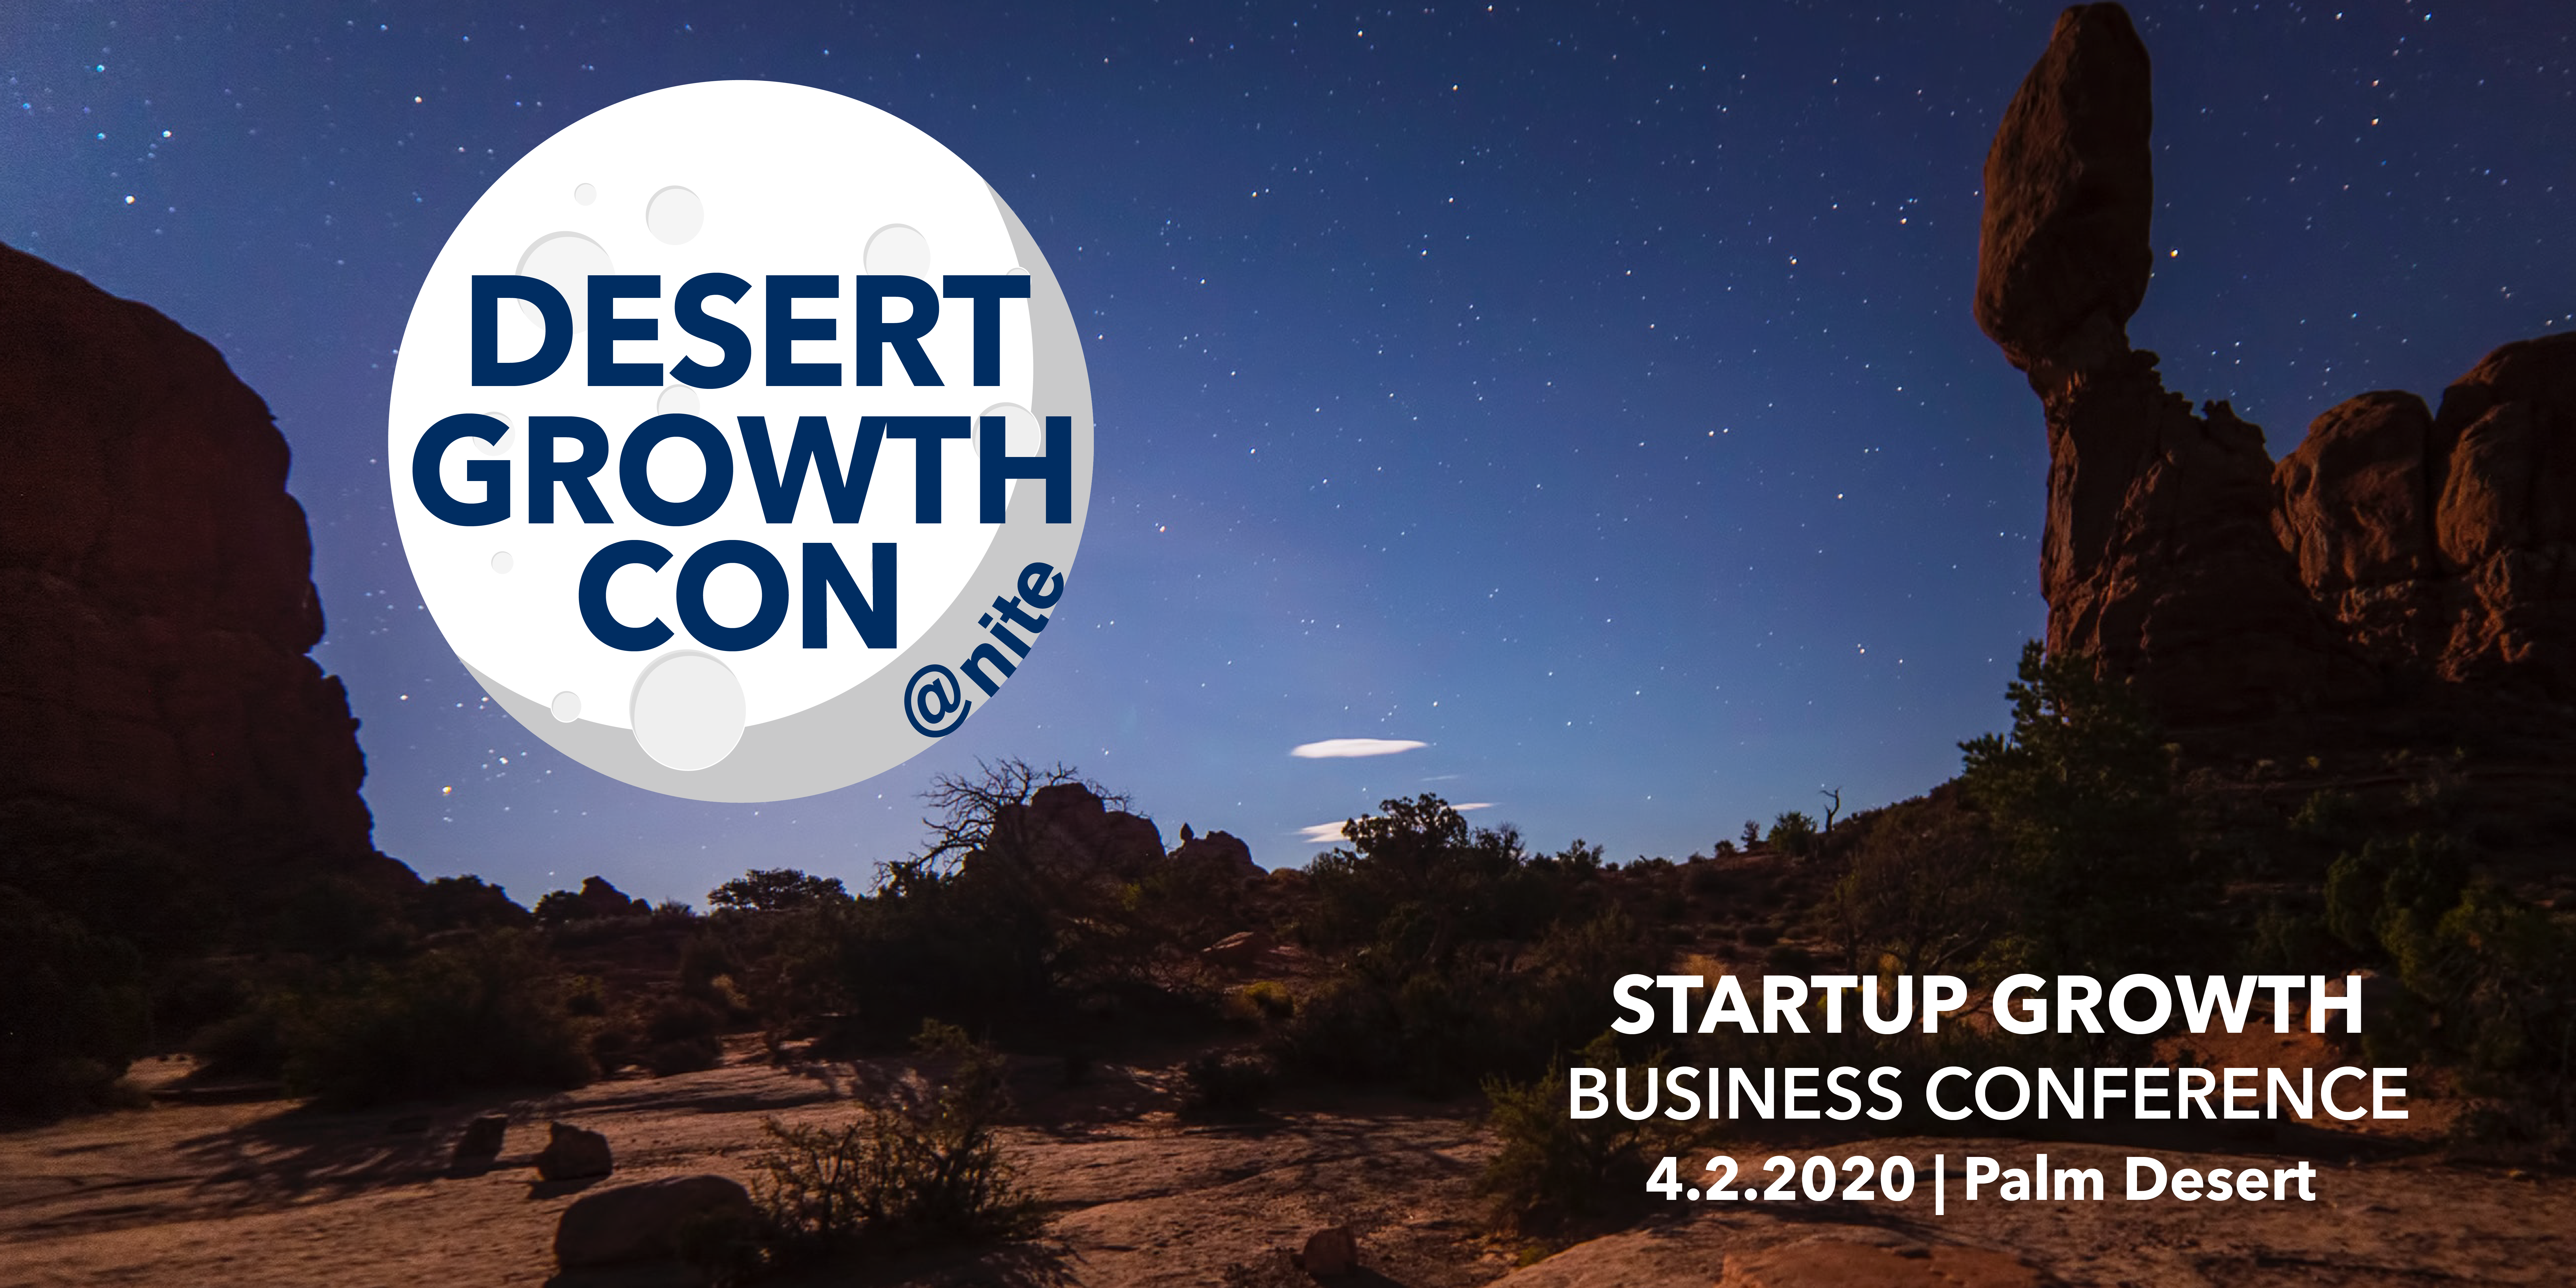 Desert Growth Con: Startup Growth Business Conference